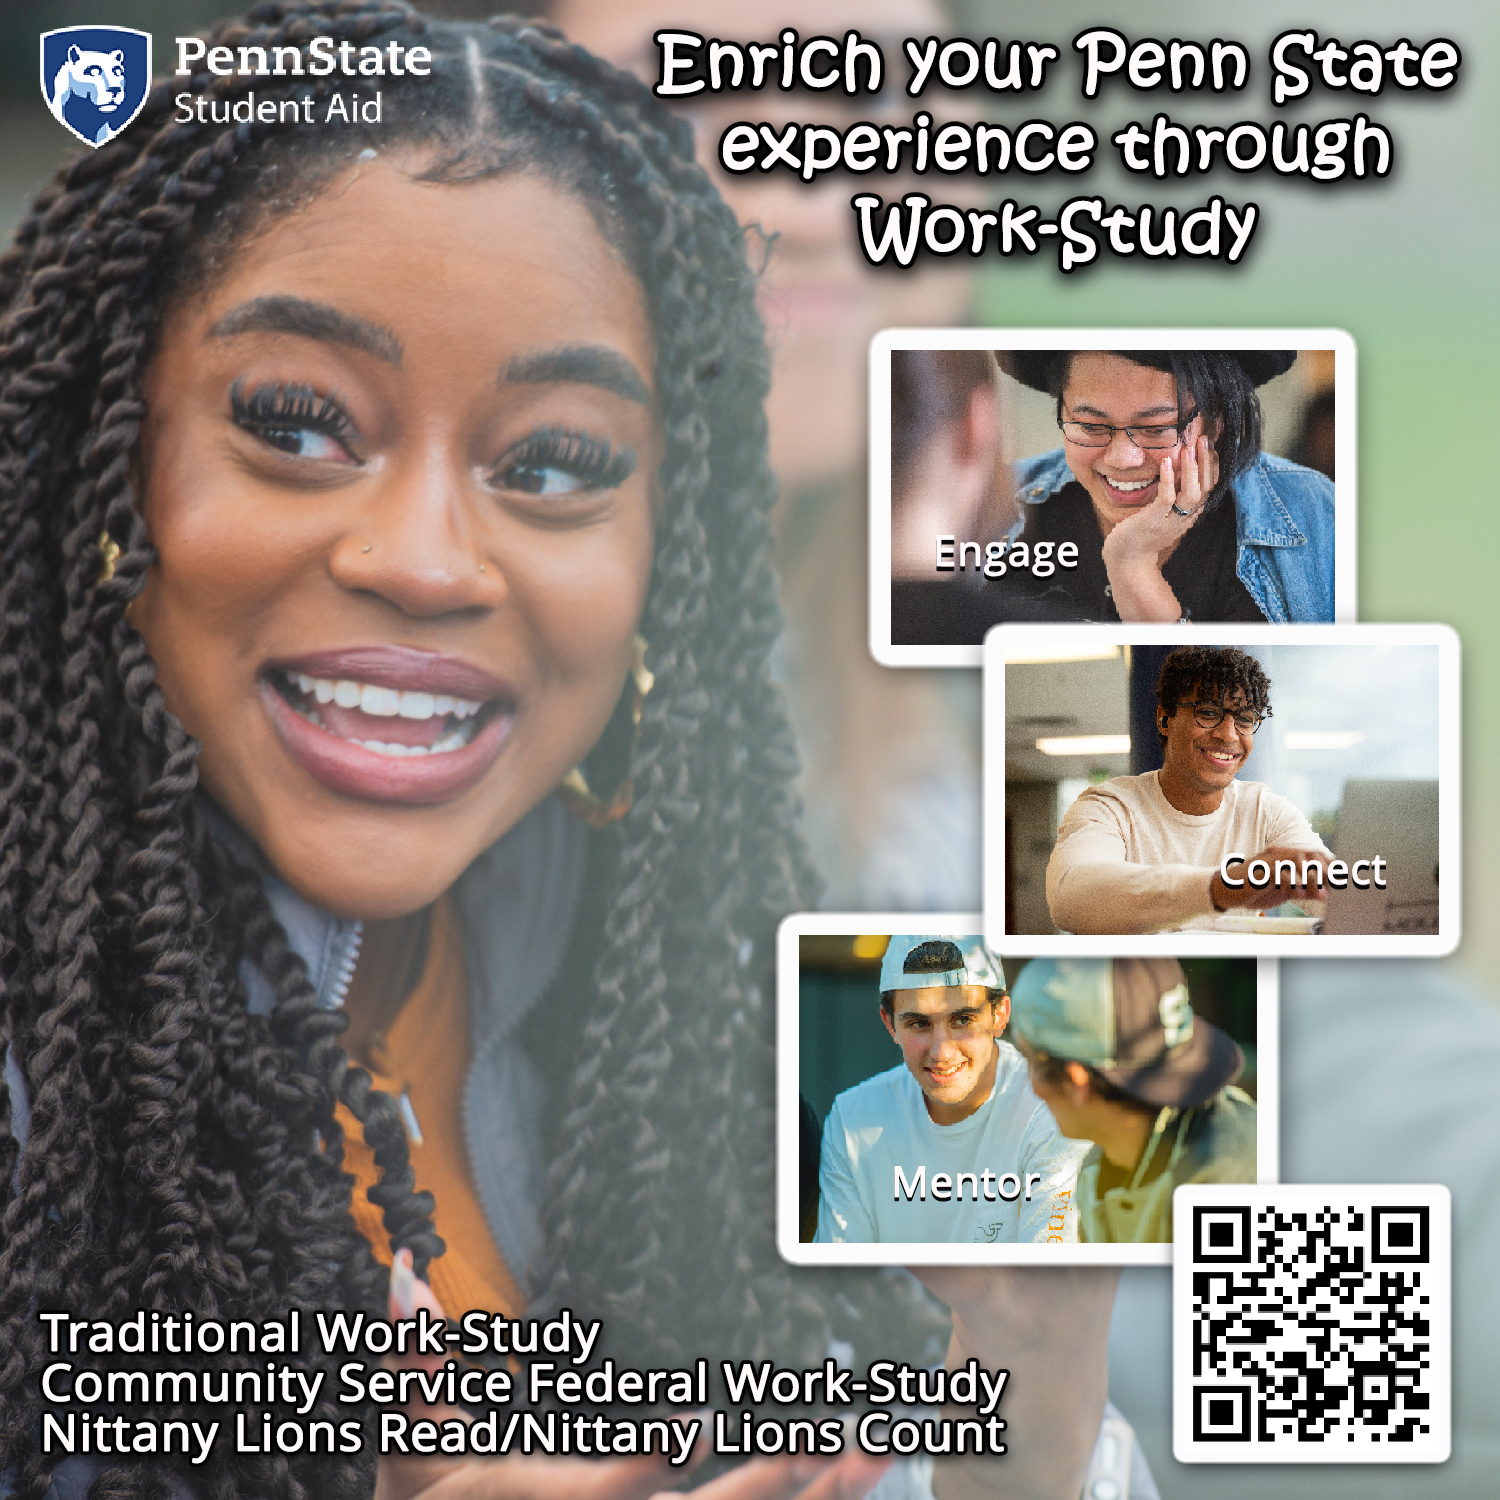 Student Images: Penn State